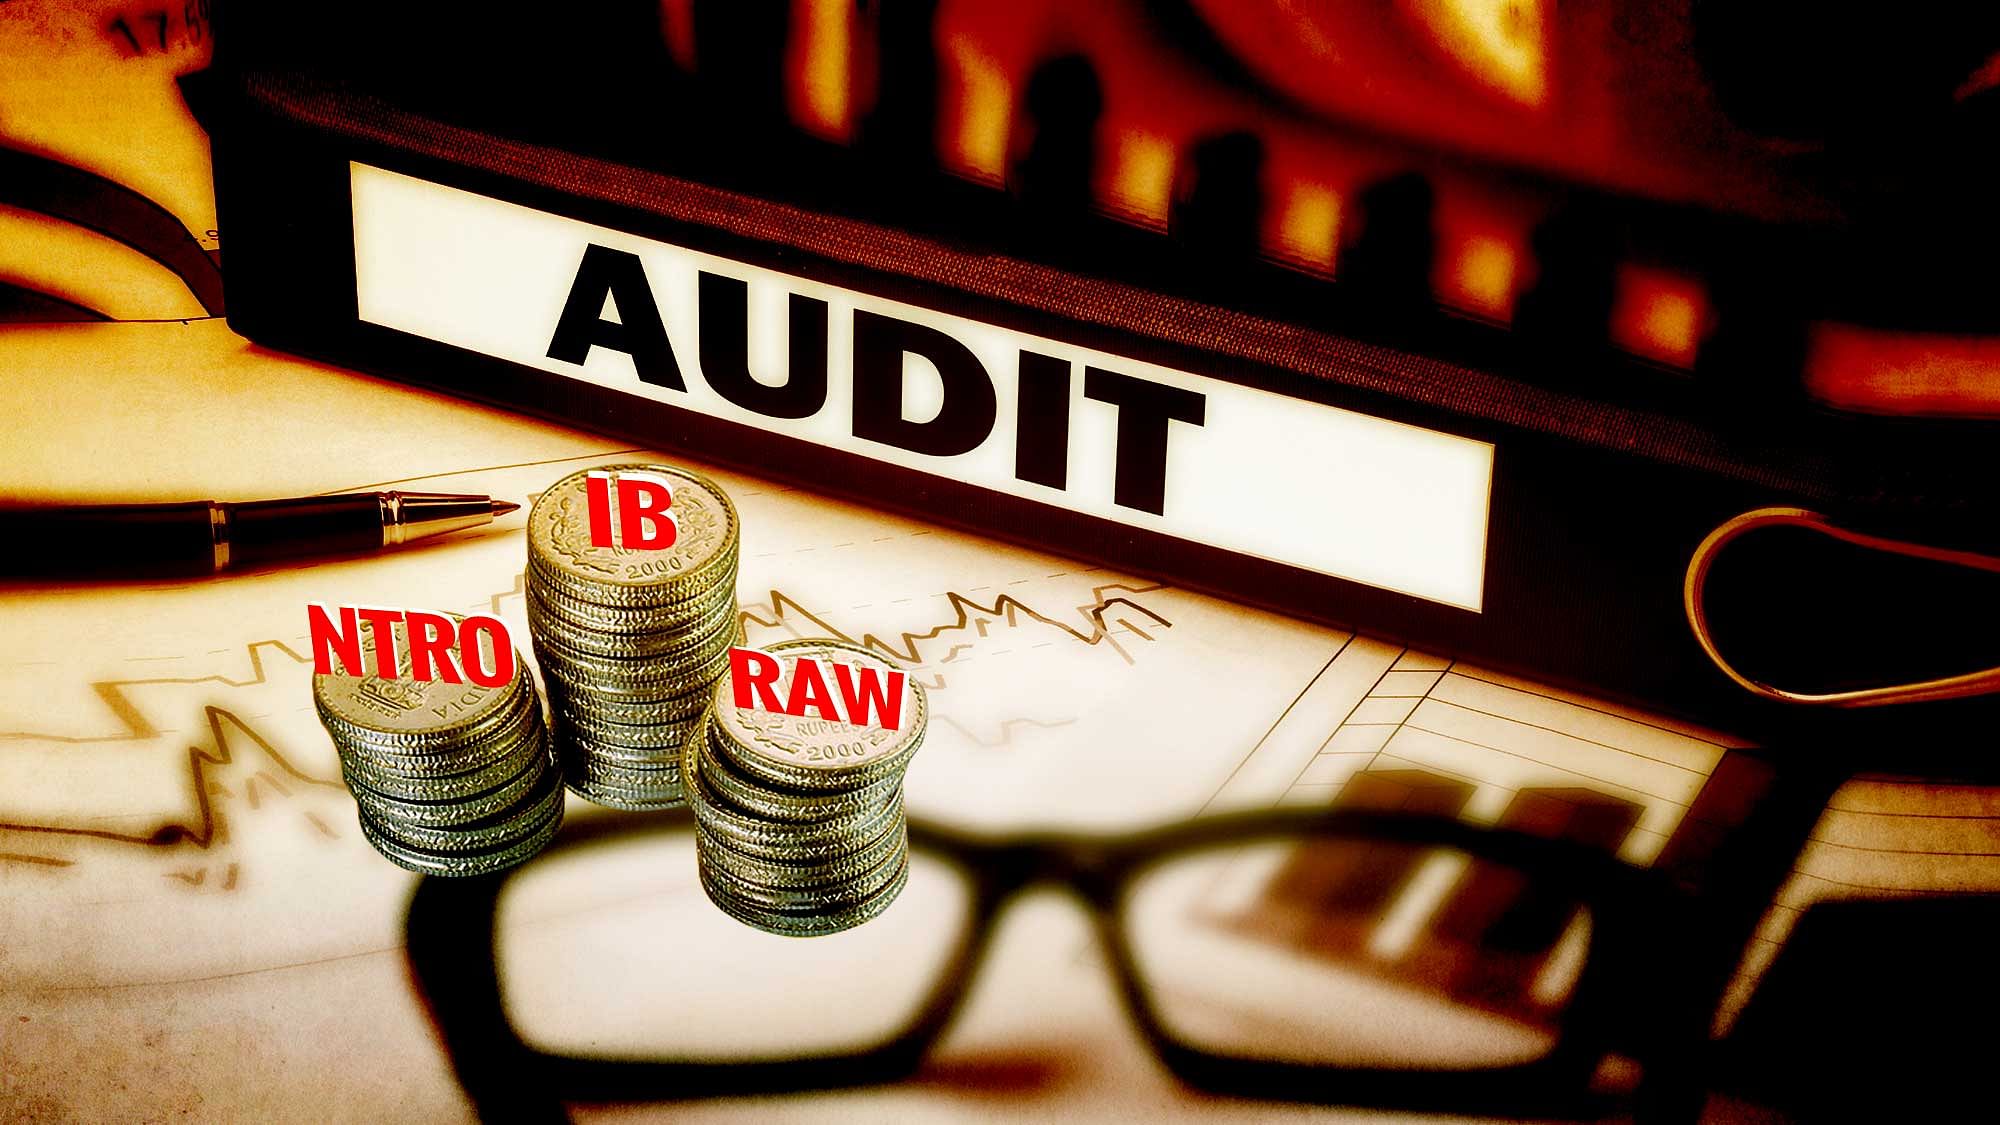 The group would look at whether there is an adverse impact on “Indian audit firms from restrictive shareholder covenants” . (Photo: <b>The Quint</b>)